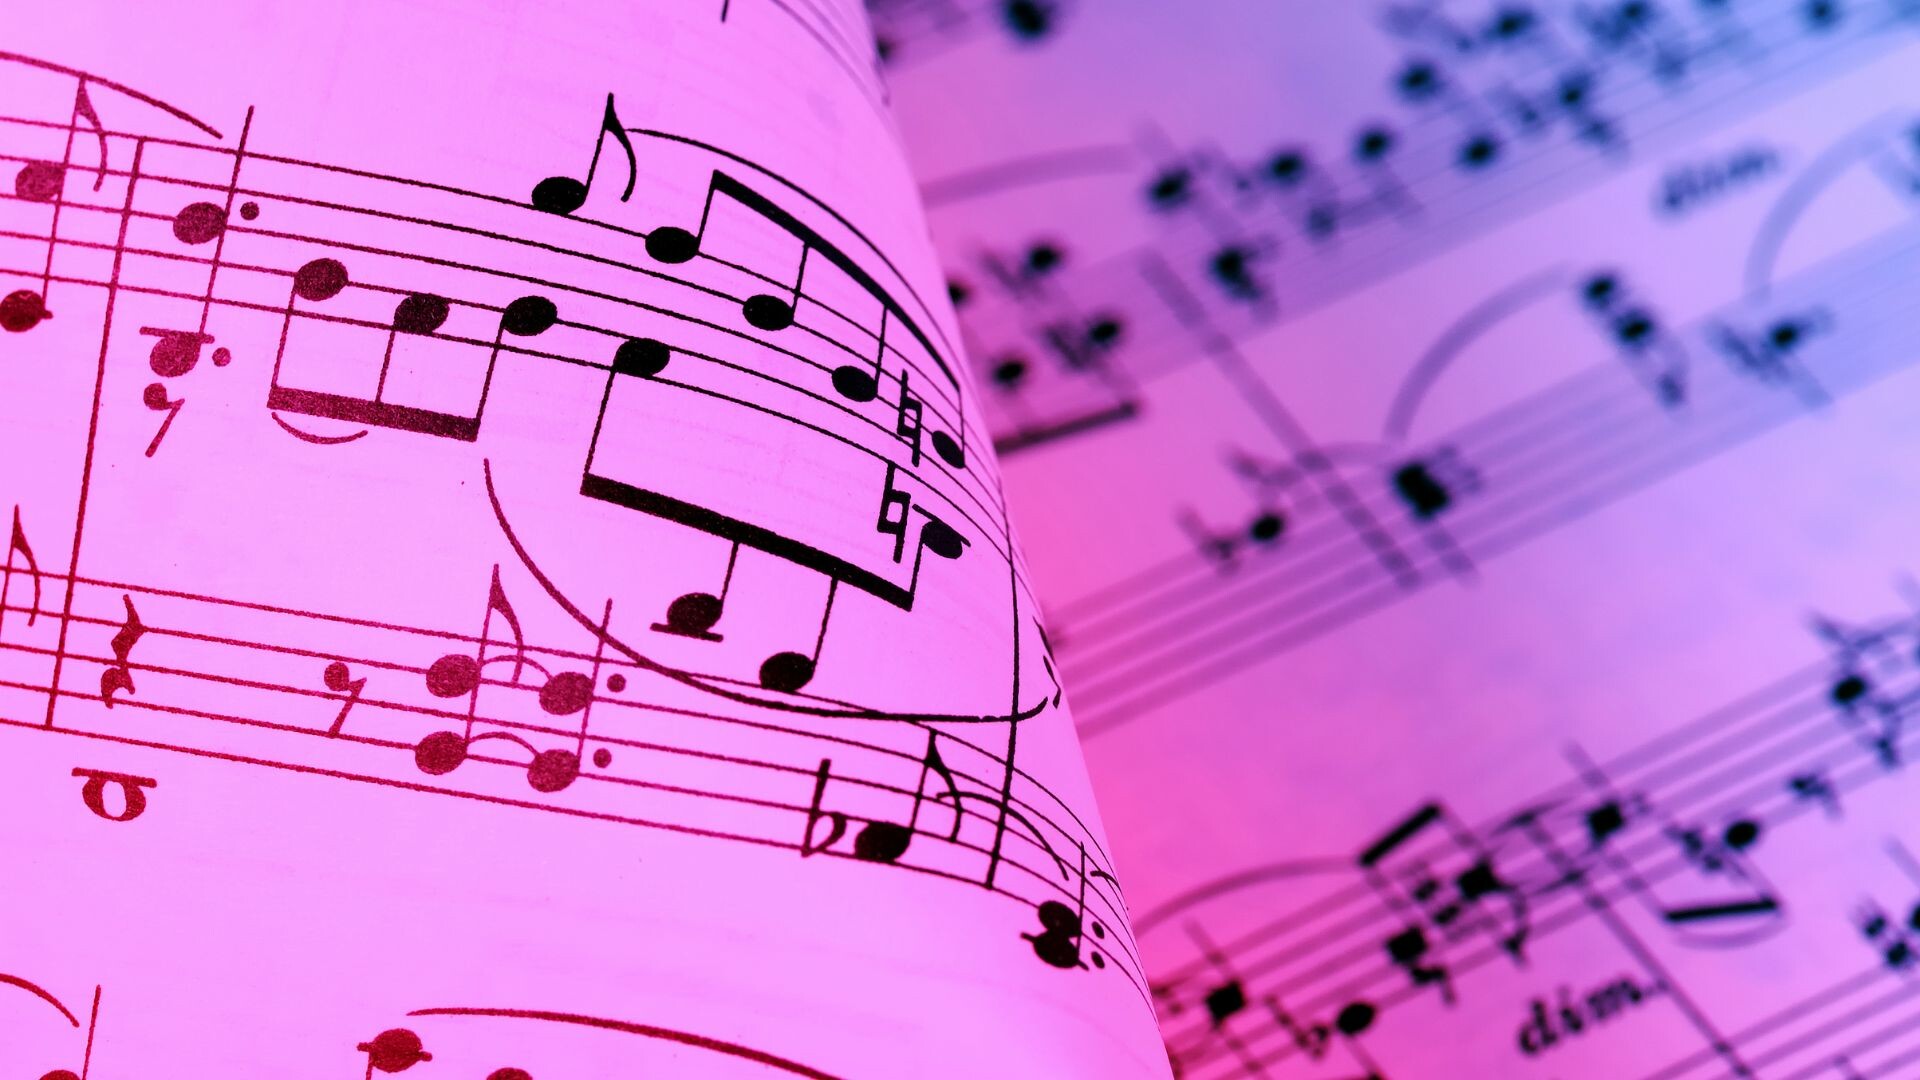 Sheet music illuminated in blue and red light.